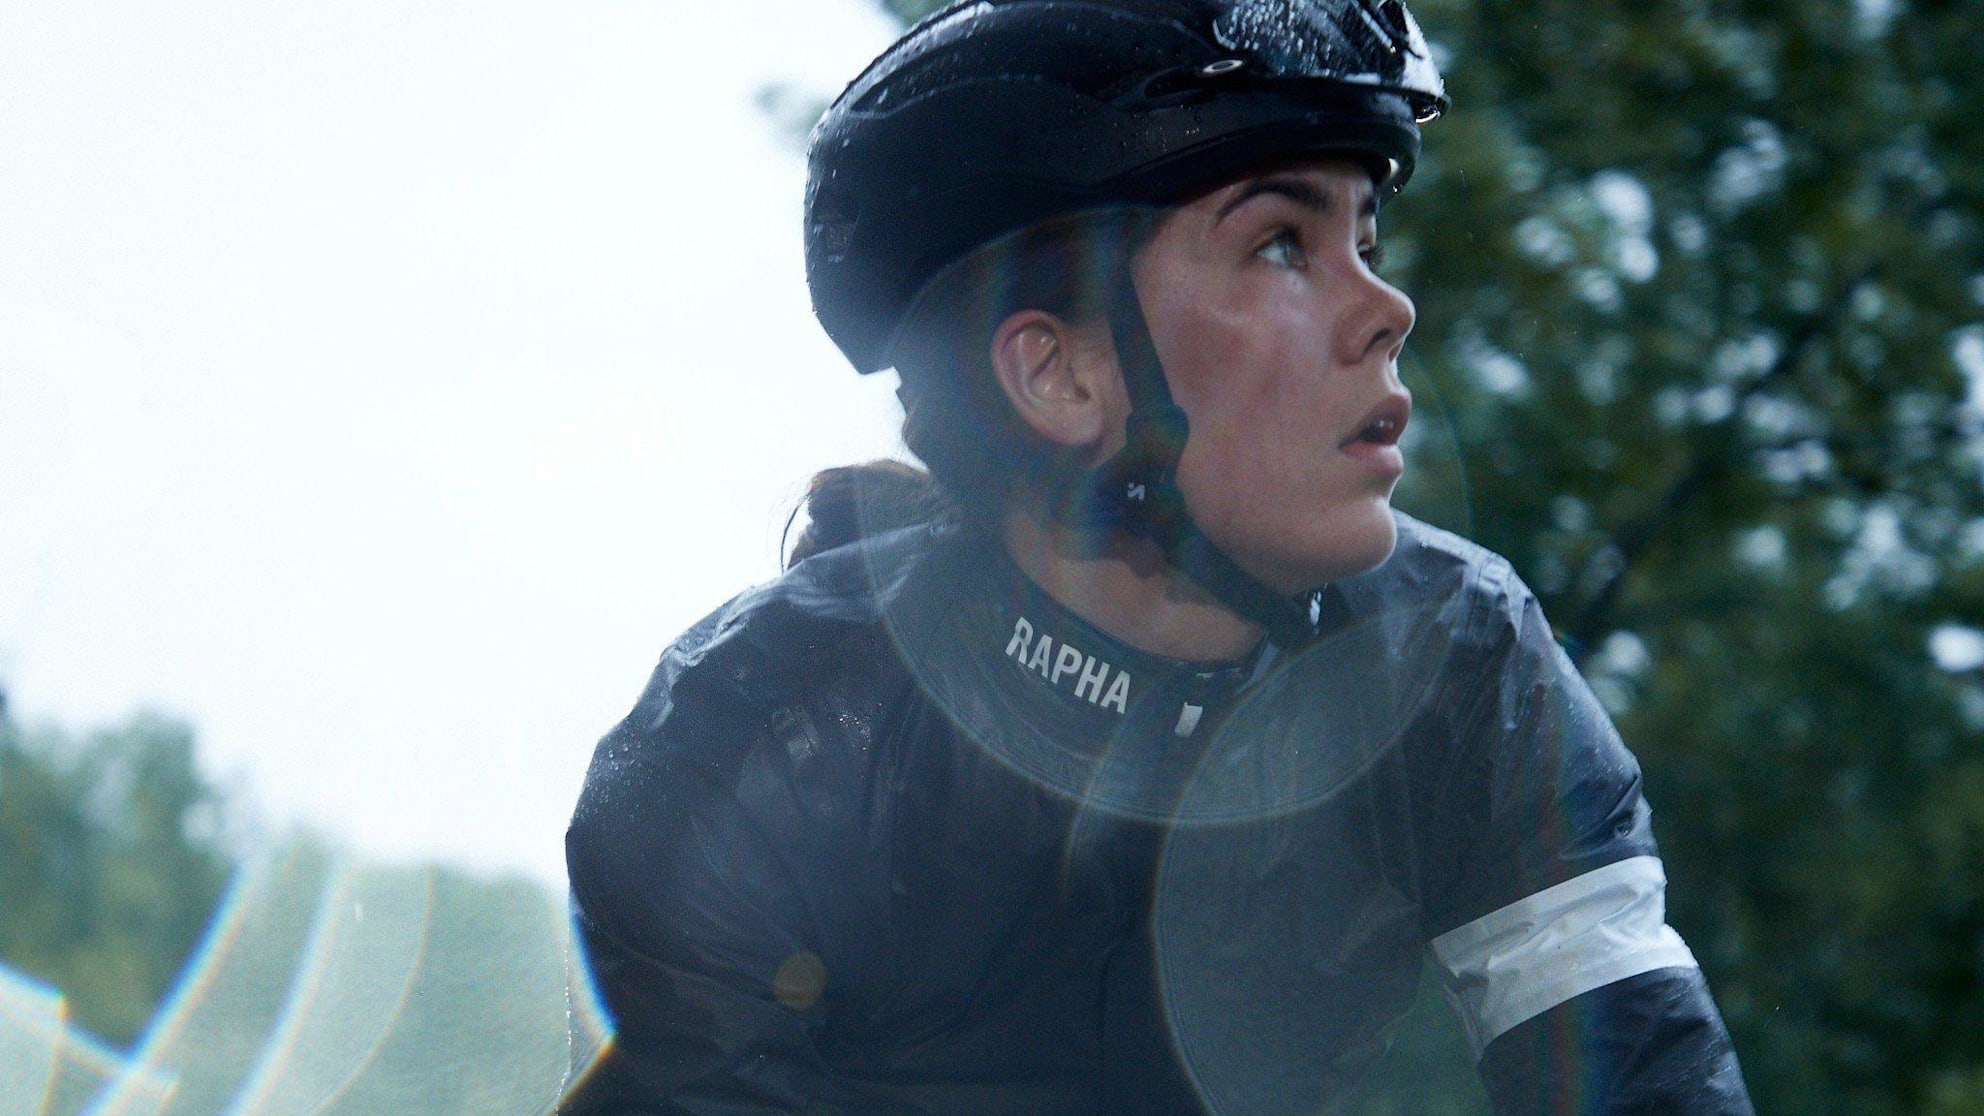 Rapha's Guide to Staying Dry - Women's